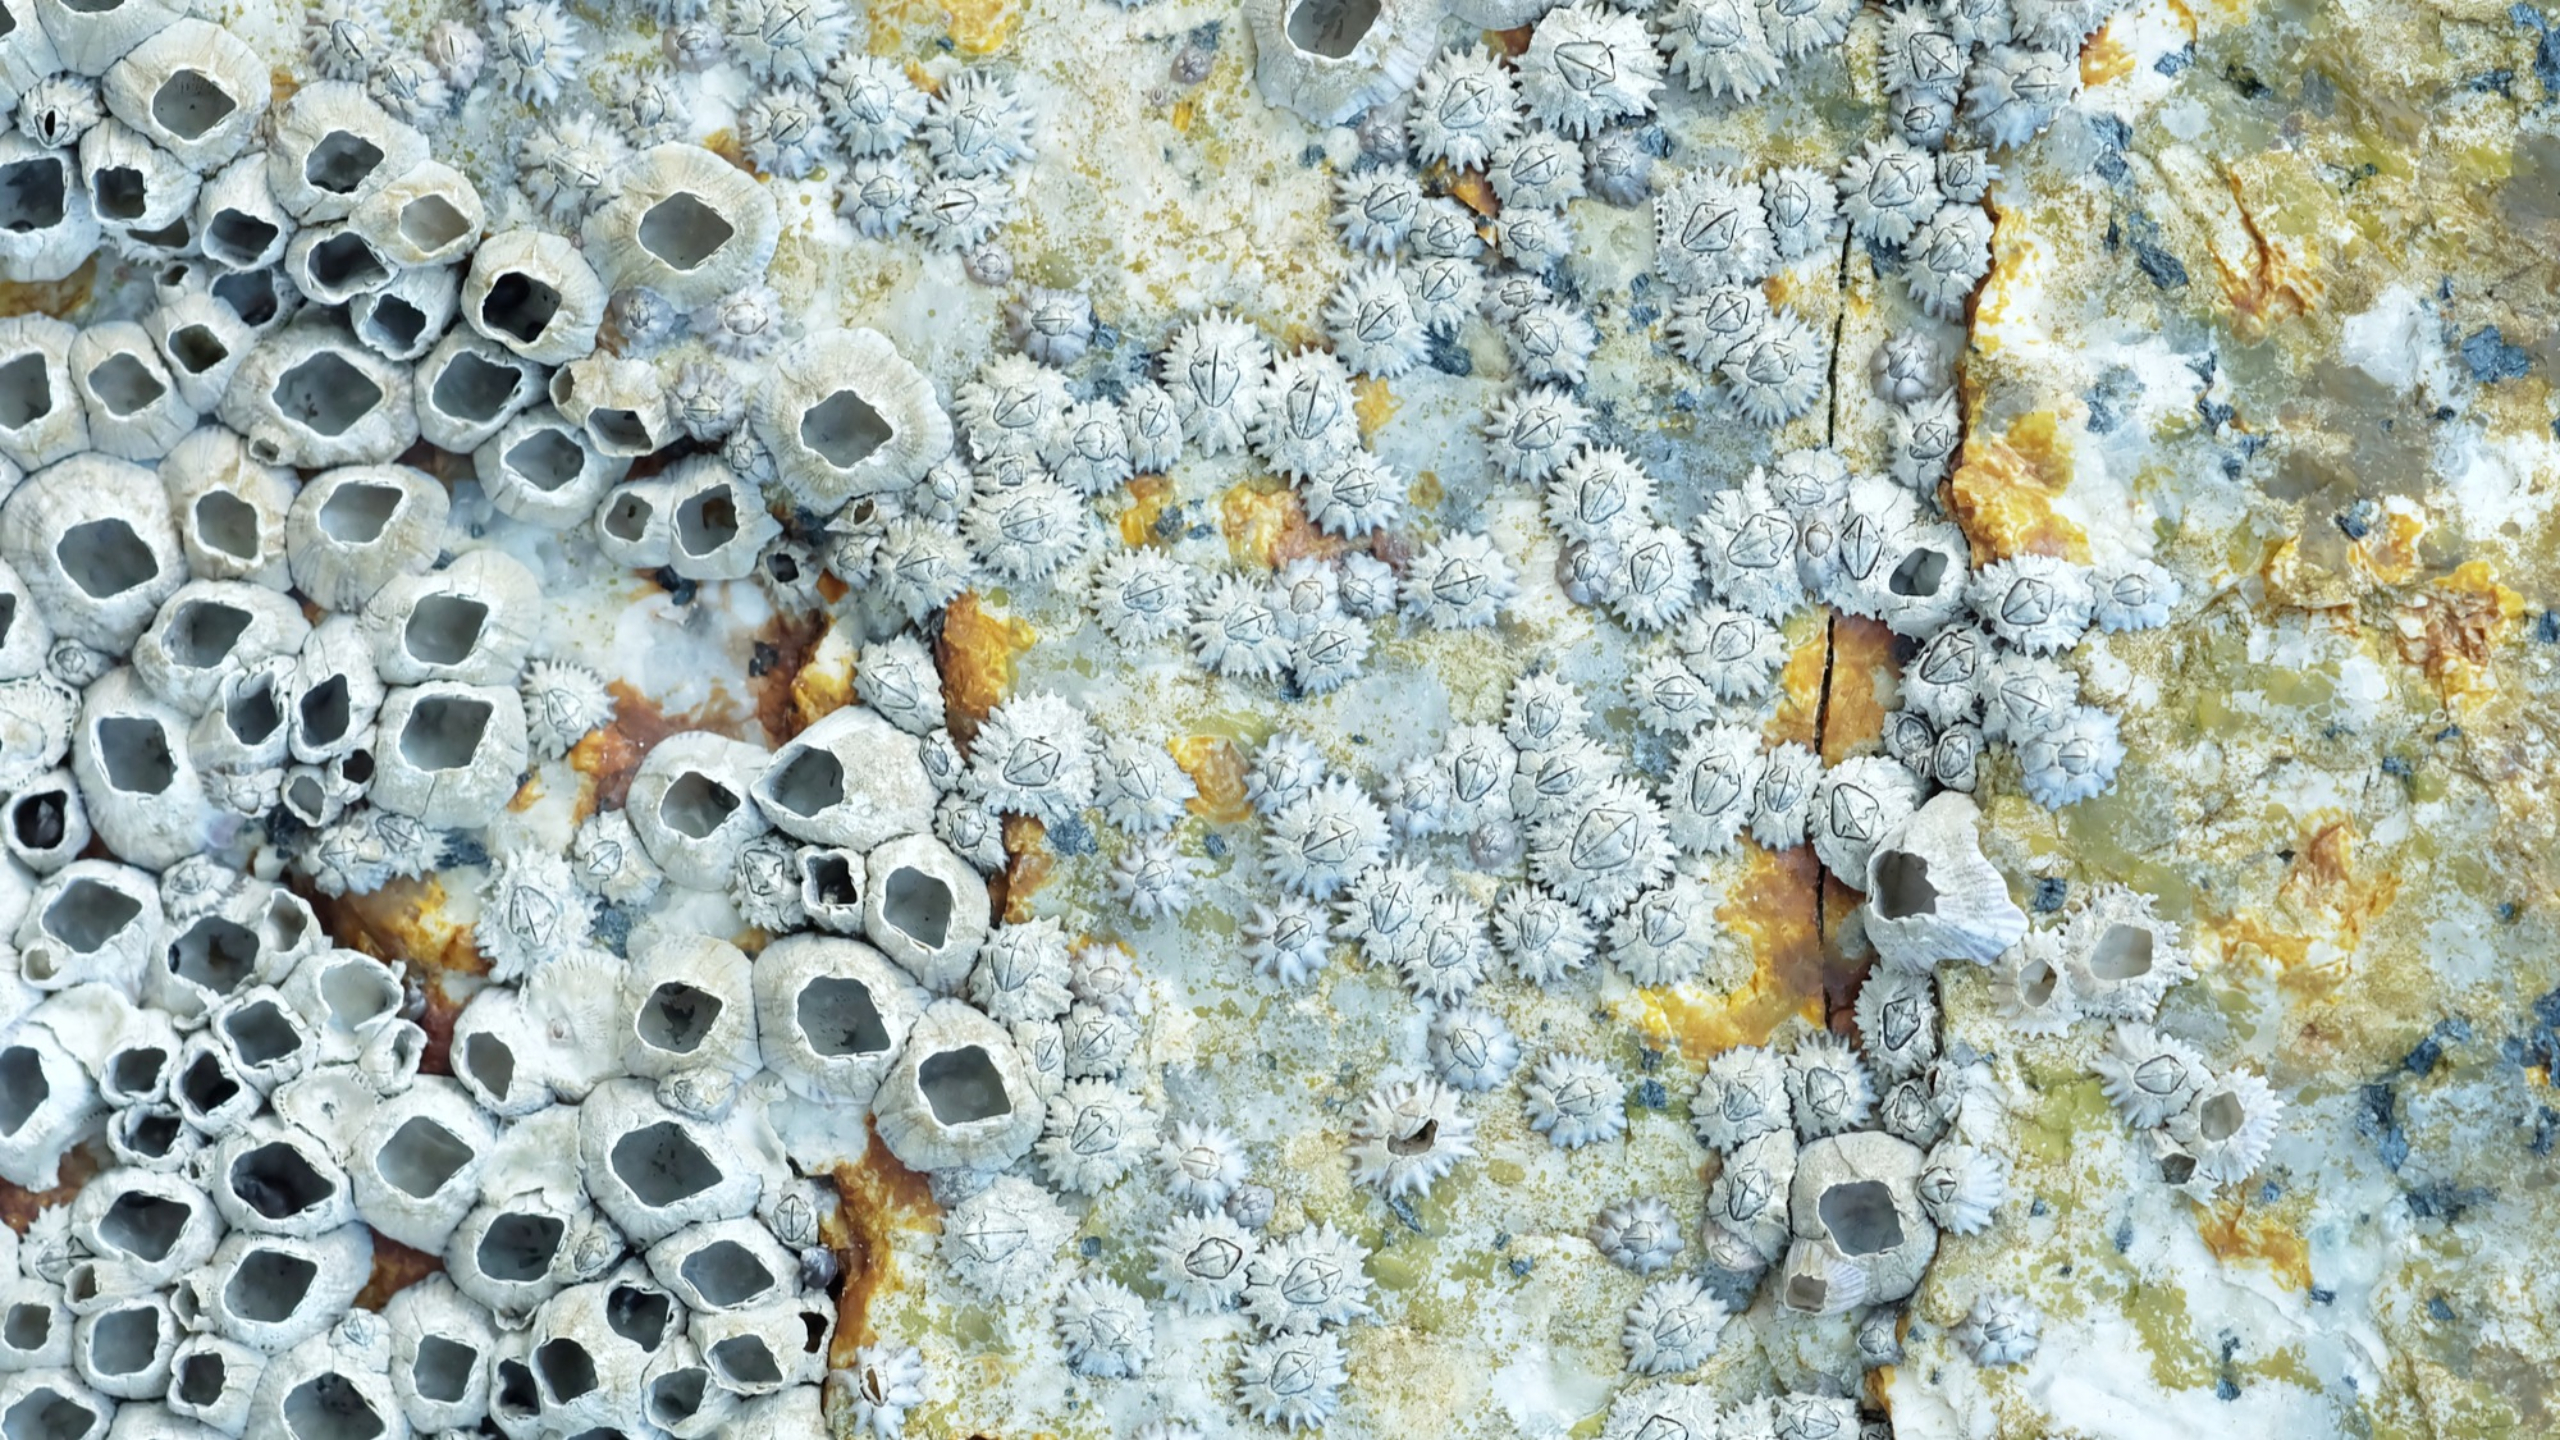 Why scientists want to banish barnacles from ship hulls